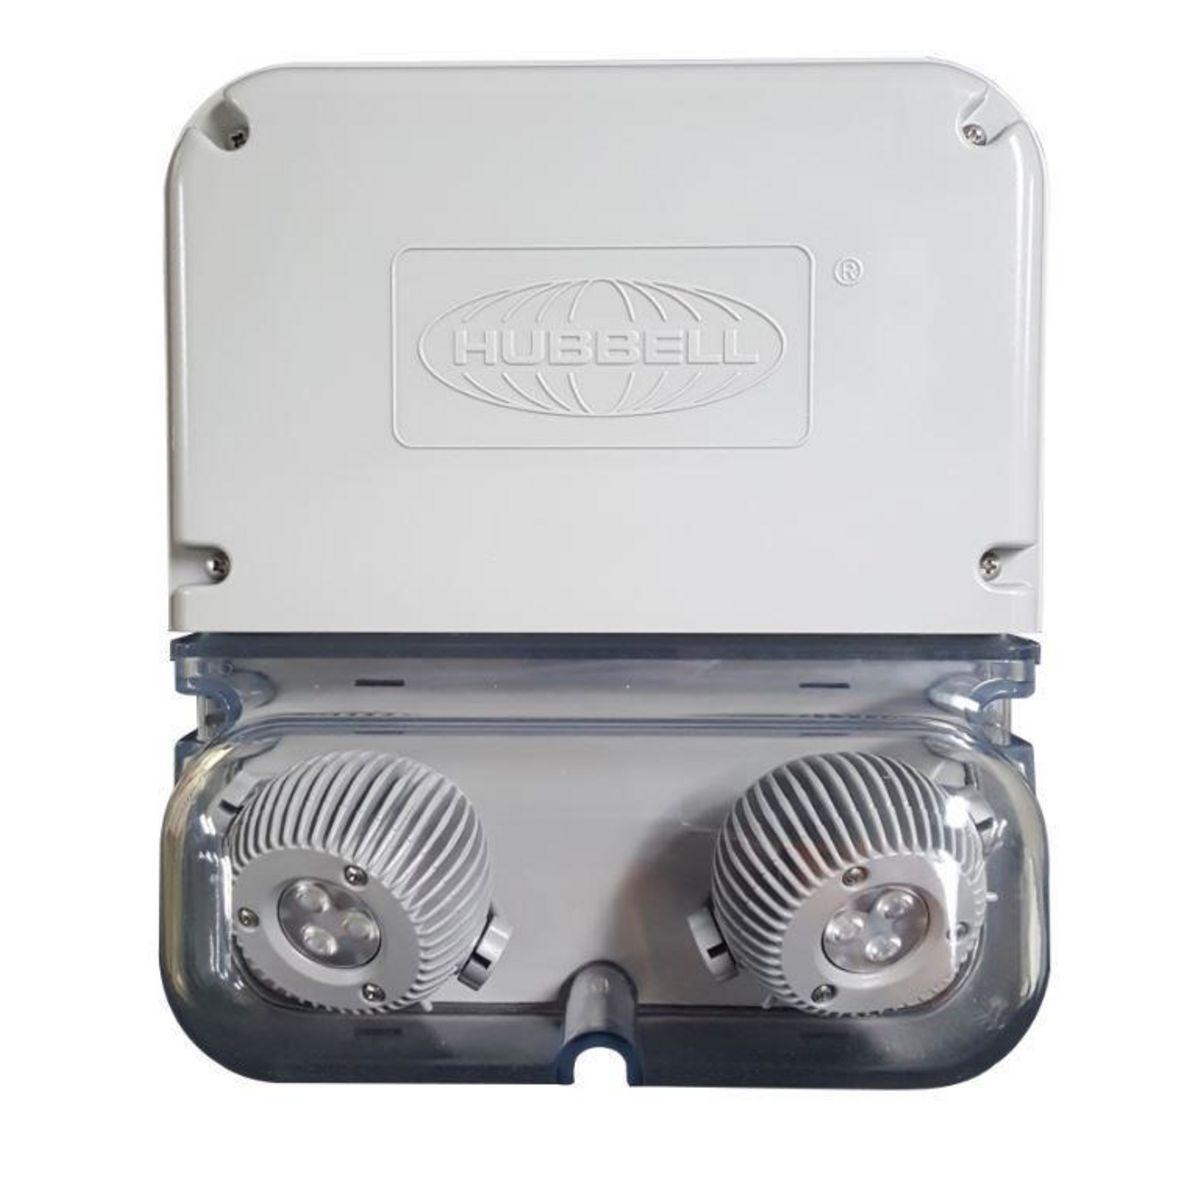 Hubbell NEBS6-C2D1 NEBS Series 6 Watt Capacity Class 2 Division 1 Rated Emergency Light Unit With 3 Watt Heads  ; Provides the same level of lumen output with no light degradation for the full 90 minutes of battery discharge. ; Flame-rated, UV stable thermoplastic housing w